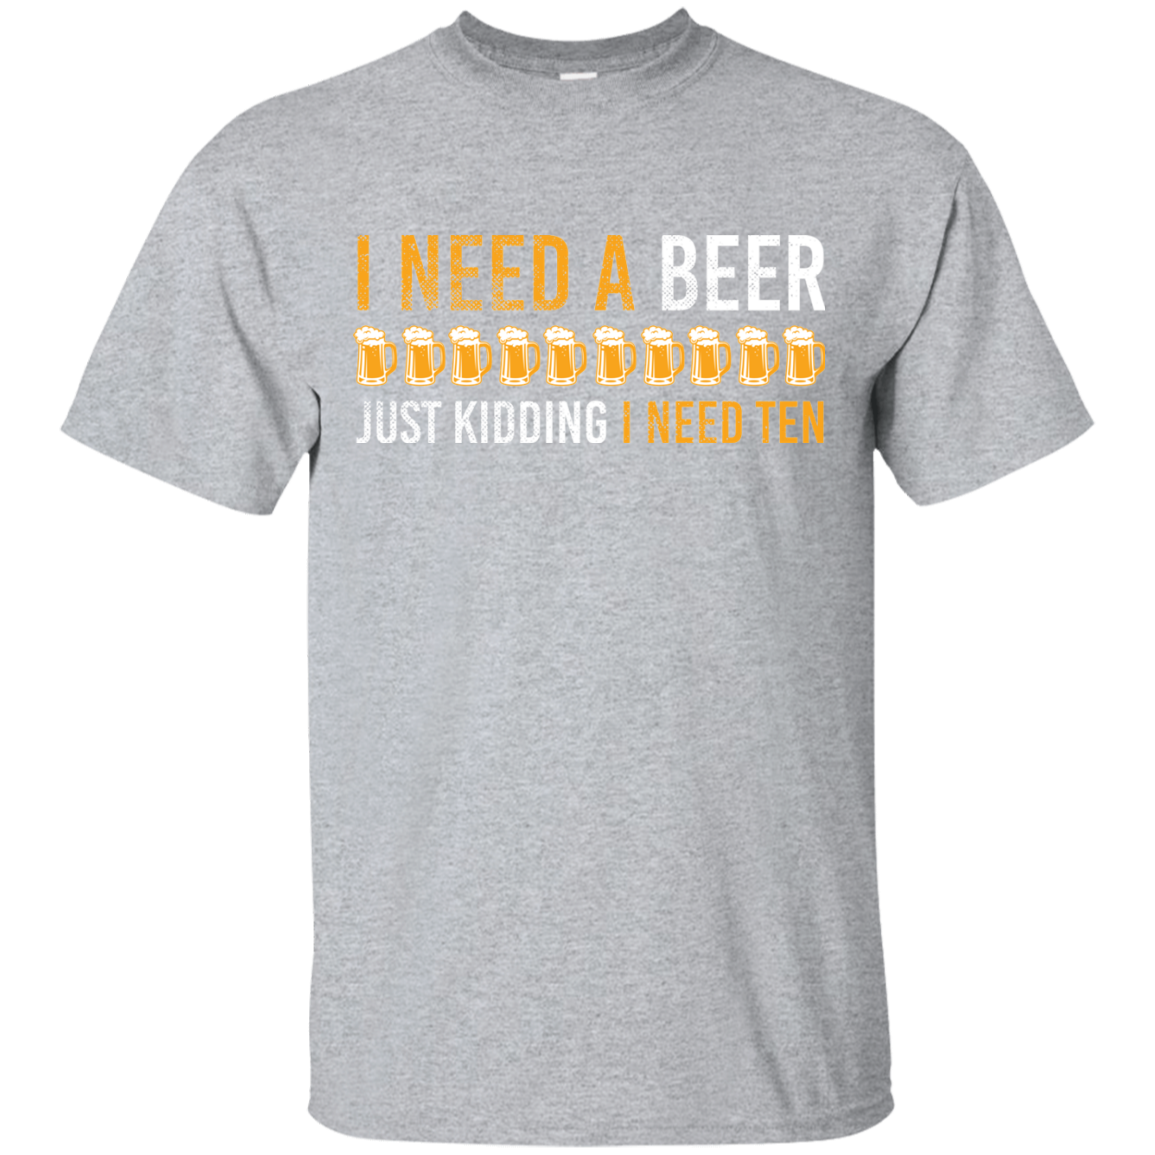 I Need A Beer T-Shirt Apparel - The Beer Lodge